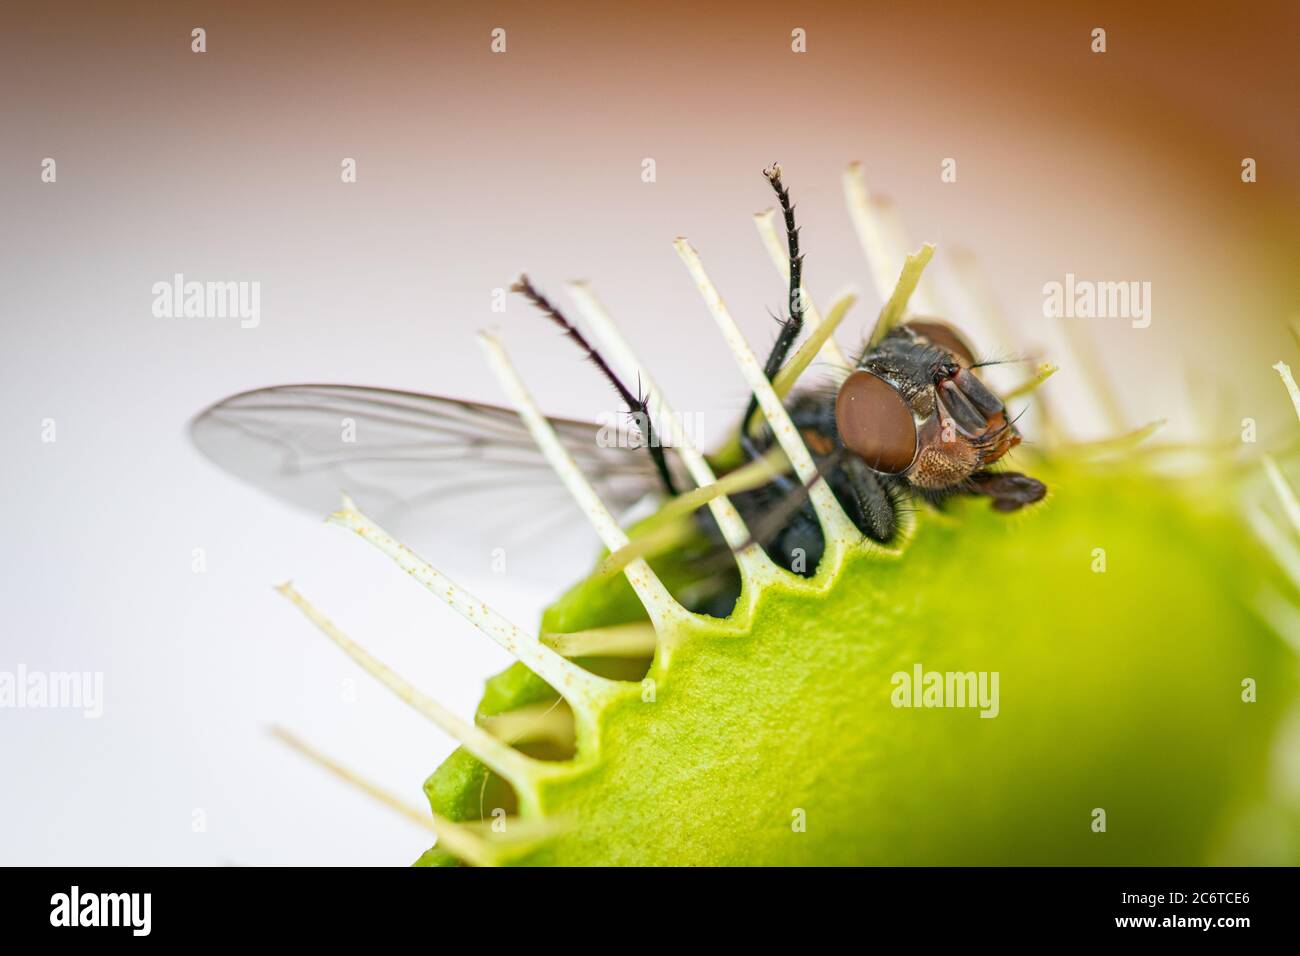 a green bottle fly trapped inside a hungry venus flytrap Stock Photo